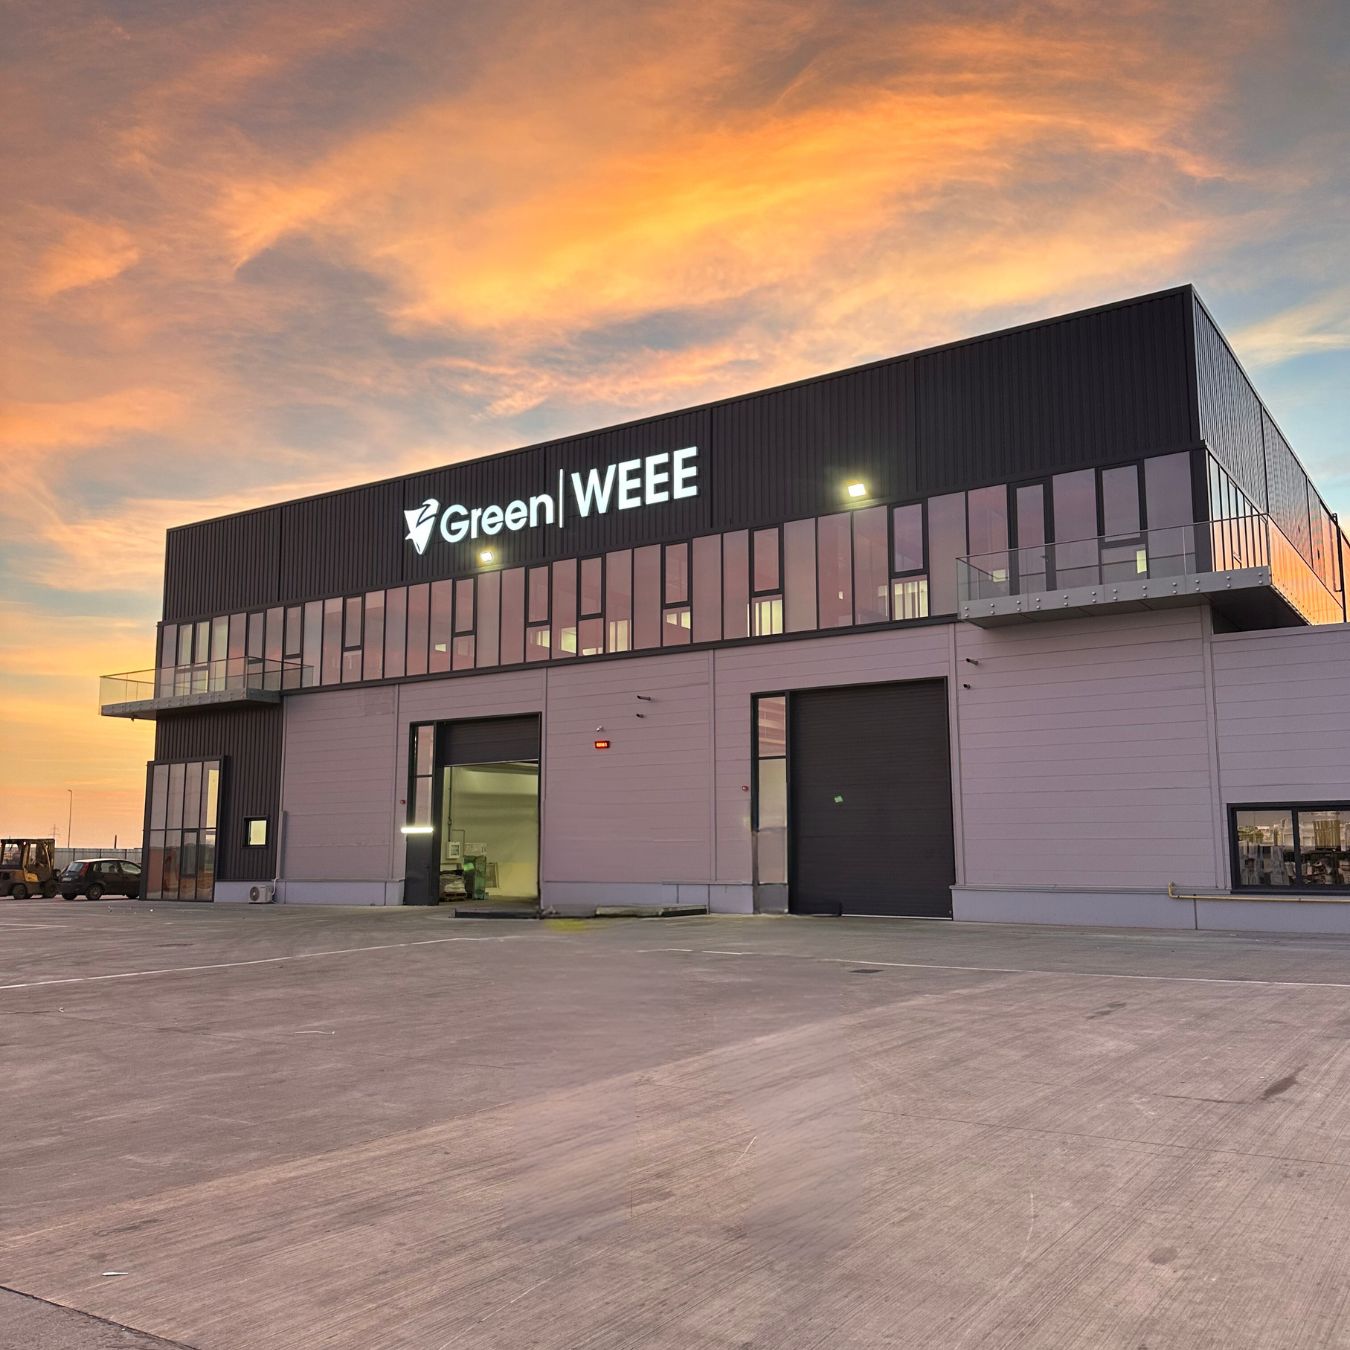 GreenWEEE has completed the construction of its third WEEE recycling facility and commenced operations in Buzau